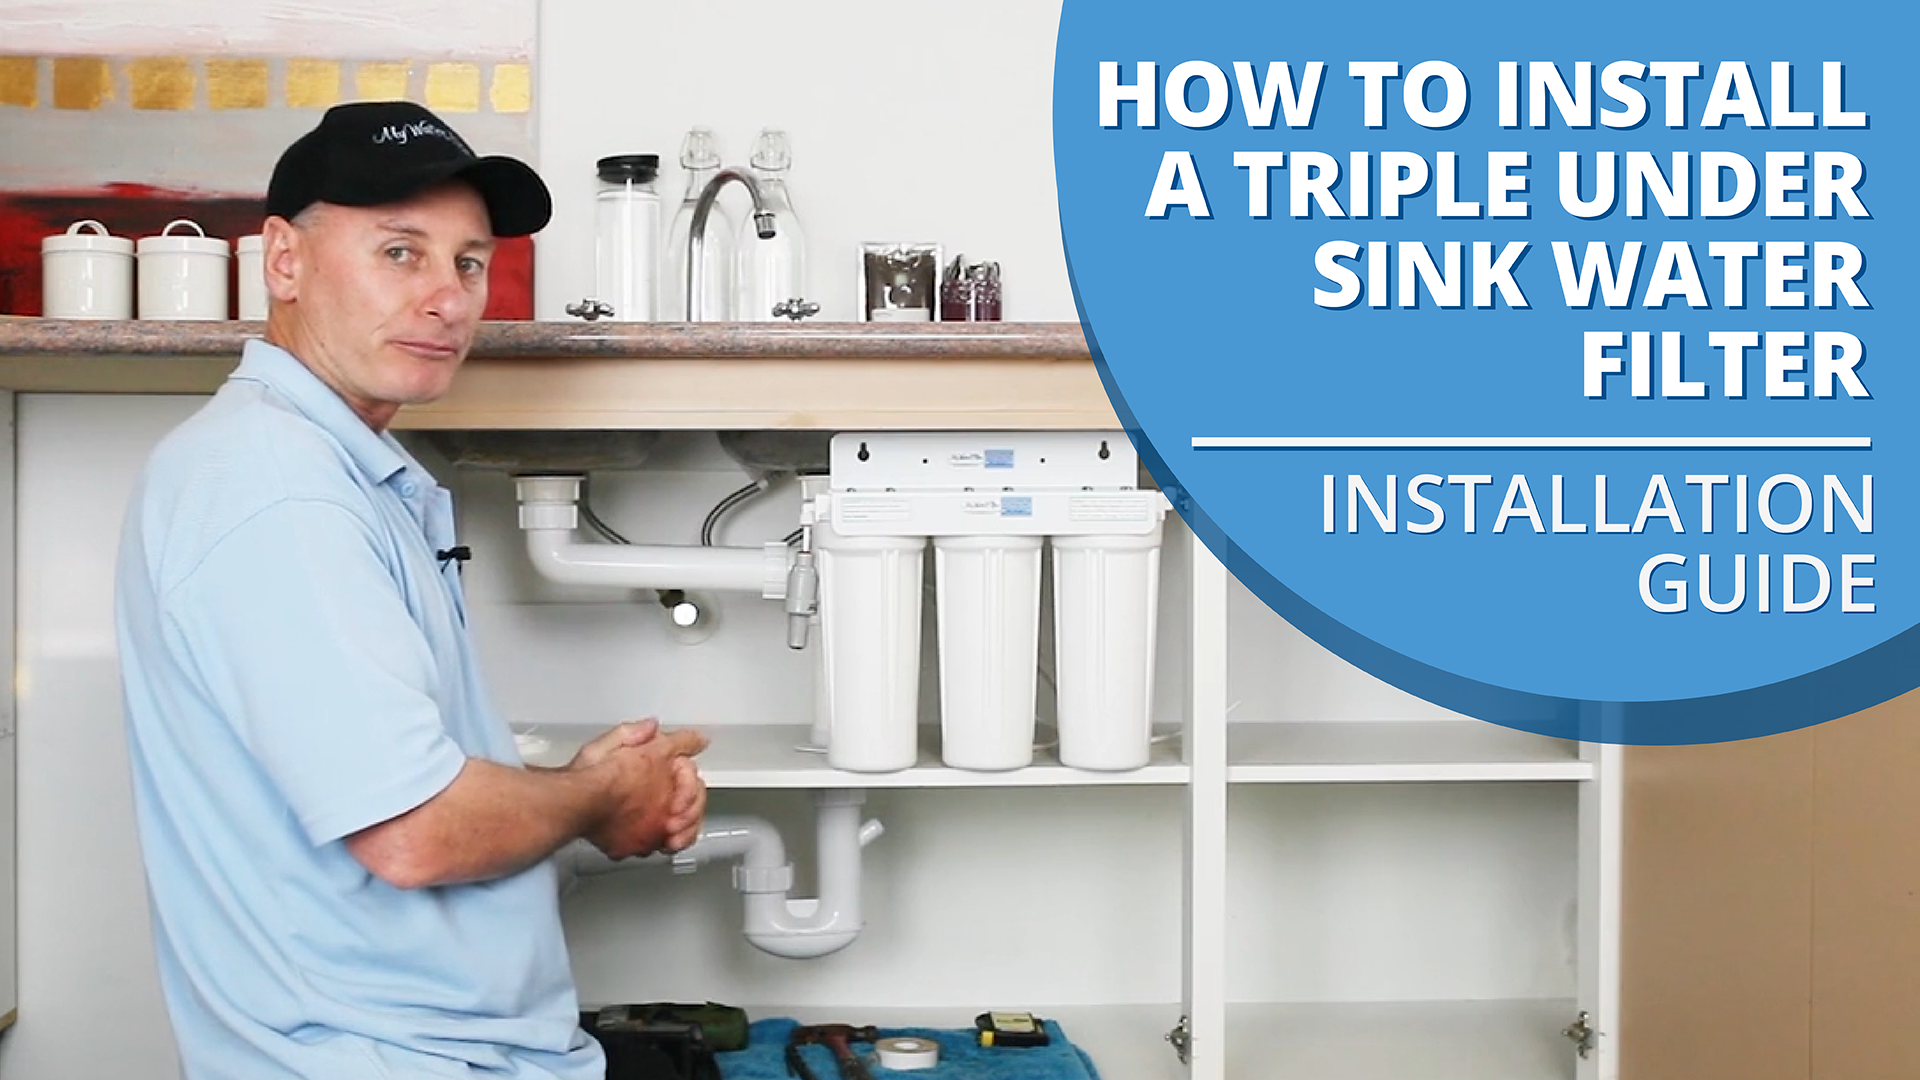 How to Install a Triple Under Sink Water Filter [VIDEO]